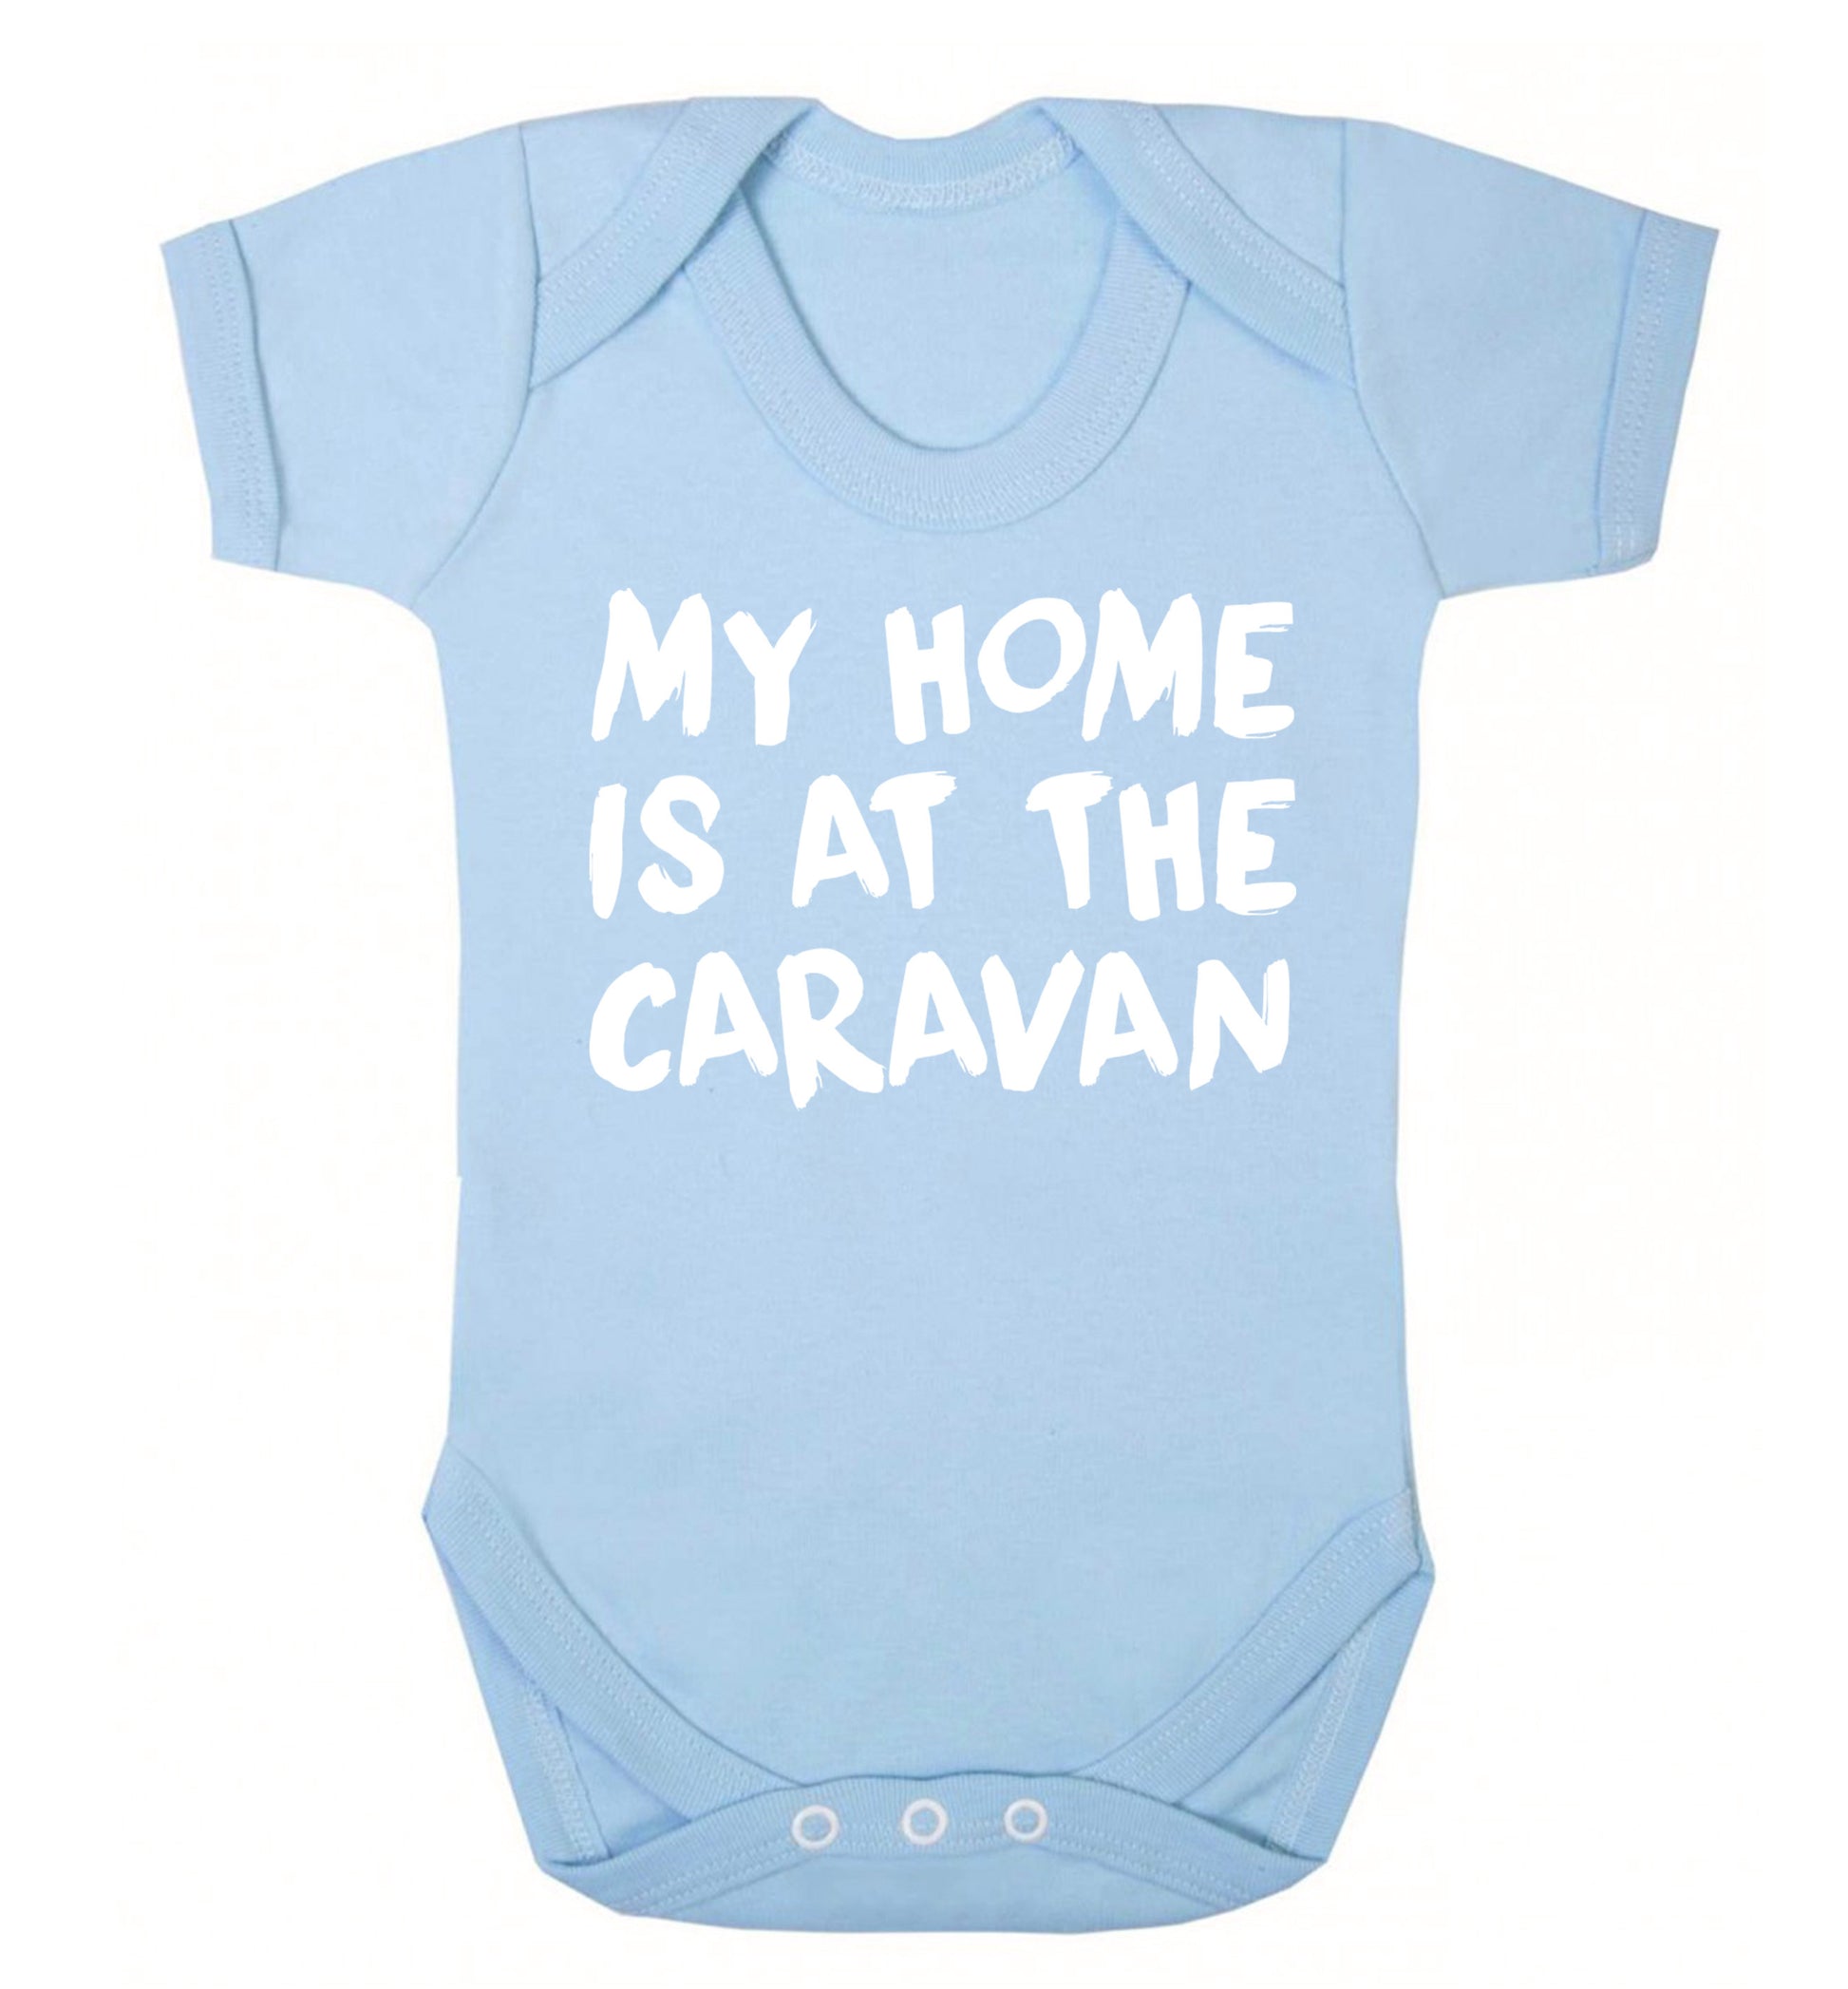 My home is at the caravan Baby Vest pale blue 18-24 months